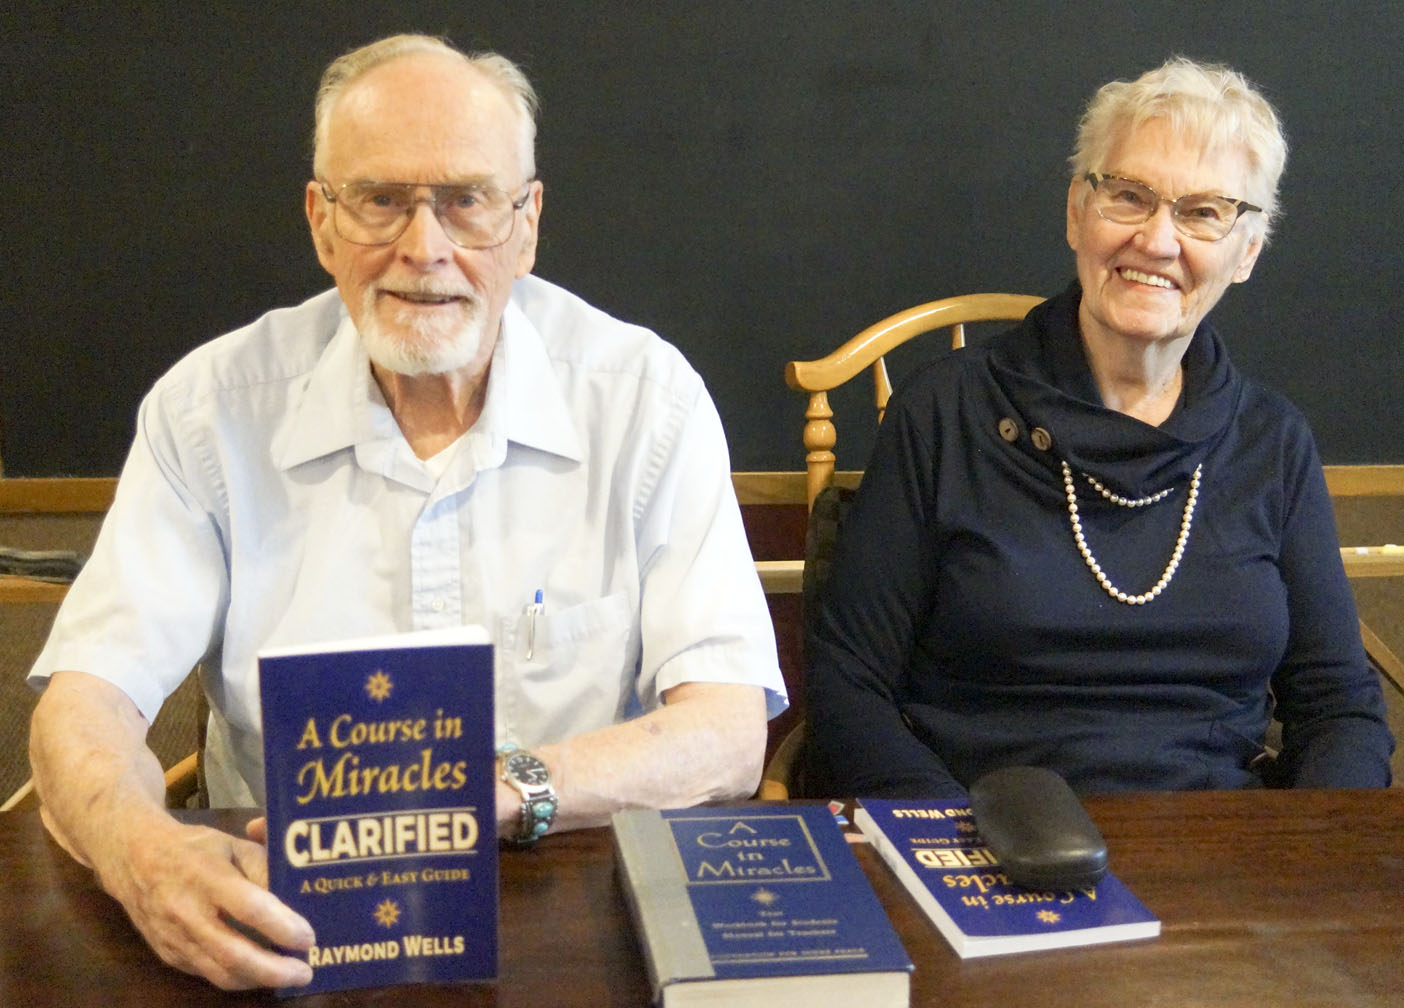 RMMC talk attendees (Ray Wells and Marjie Wells with Ray's book: A Course In Miracles Clarified